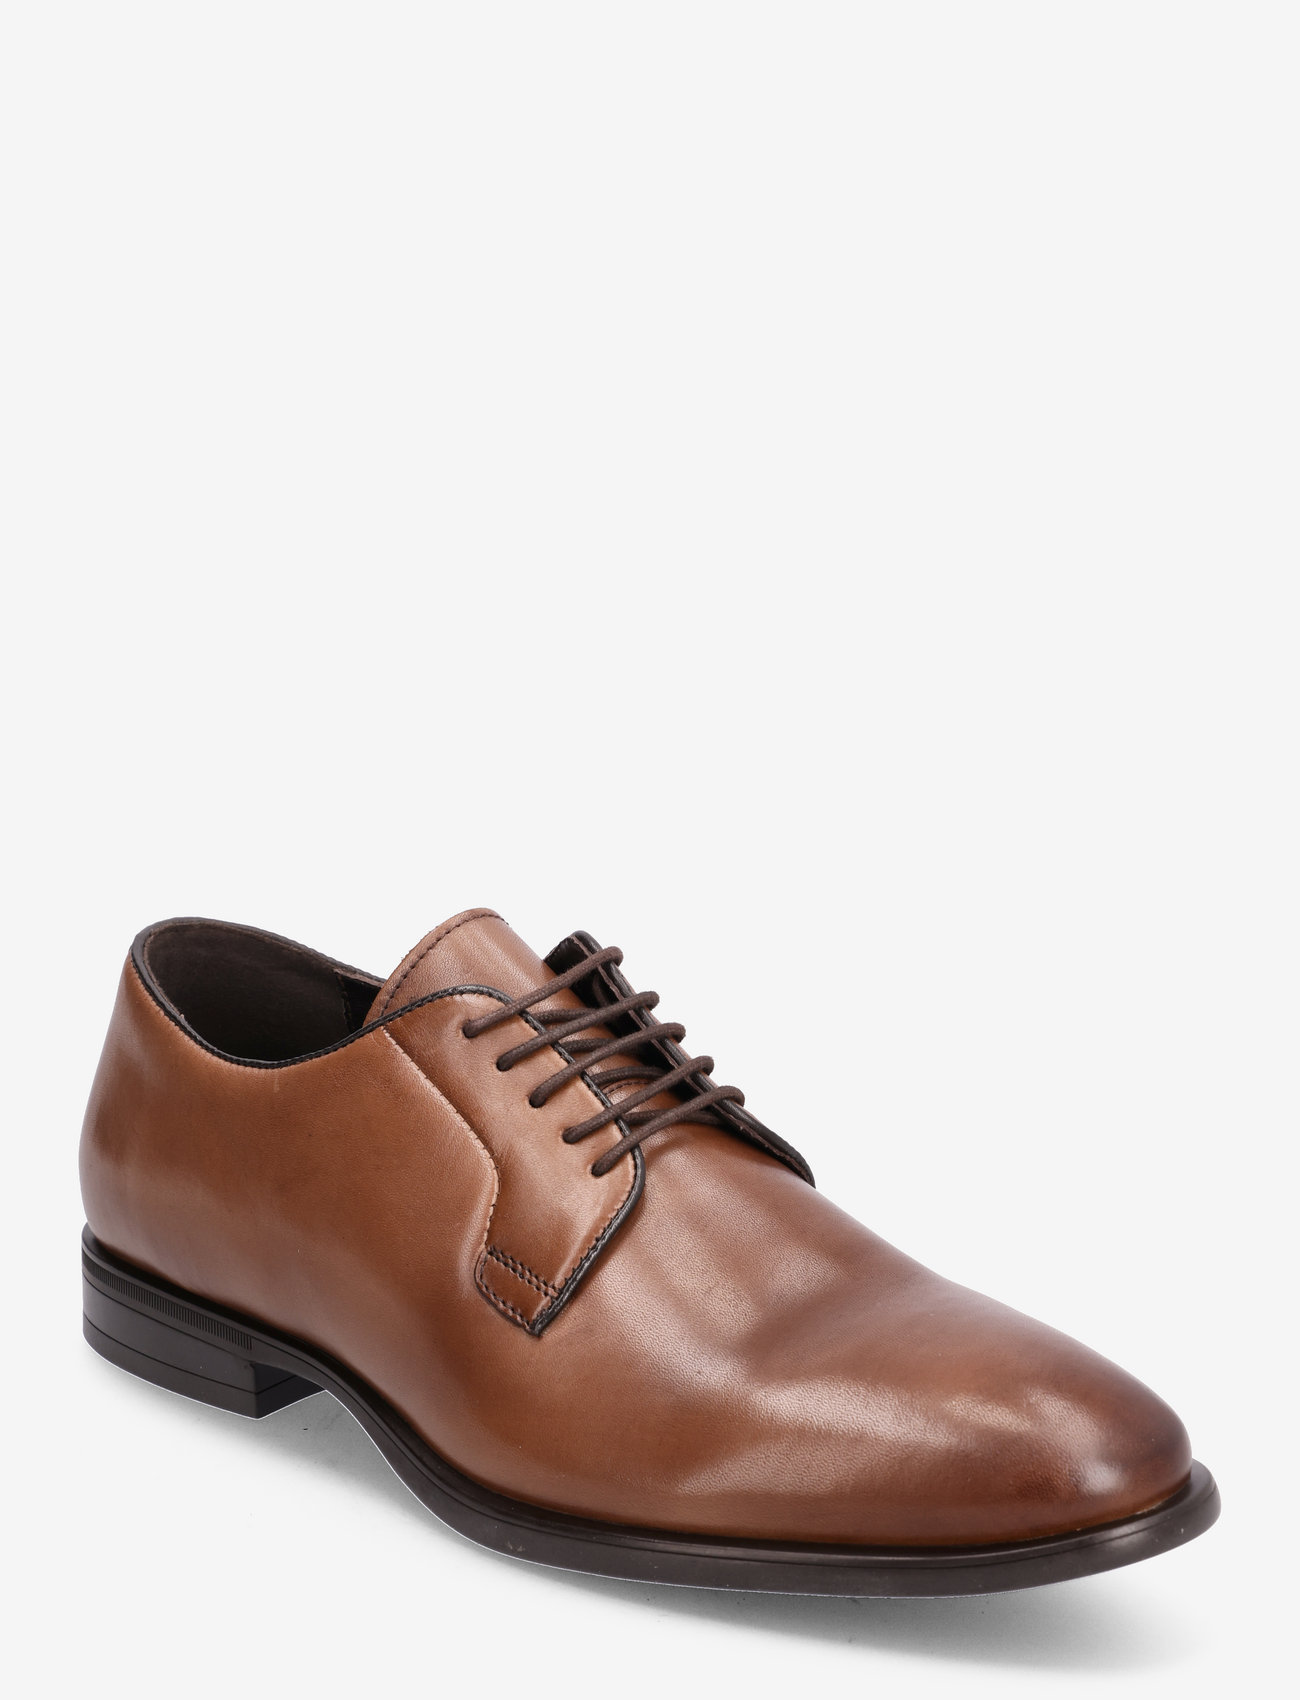 Marstrand - MURPHY DERBY MARSTRAND - laced shoes - brown - 0